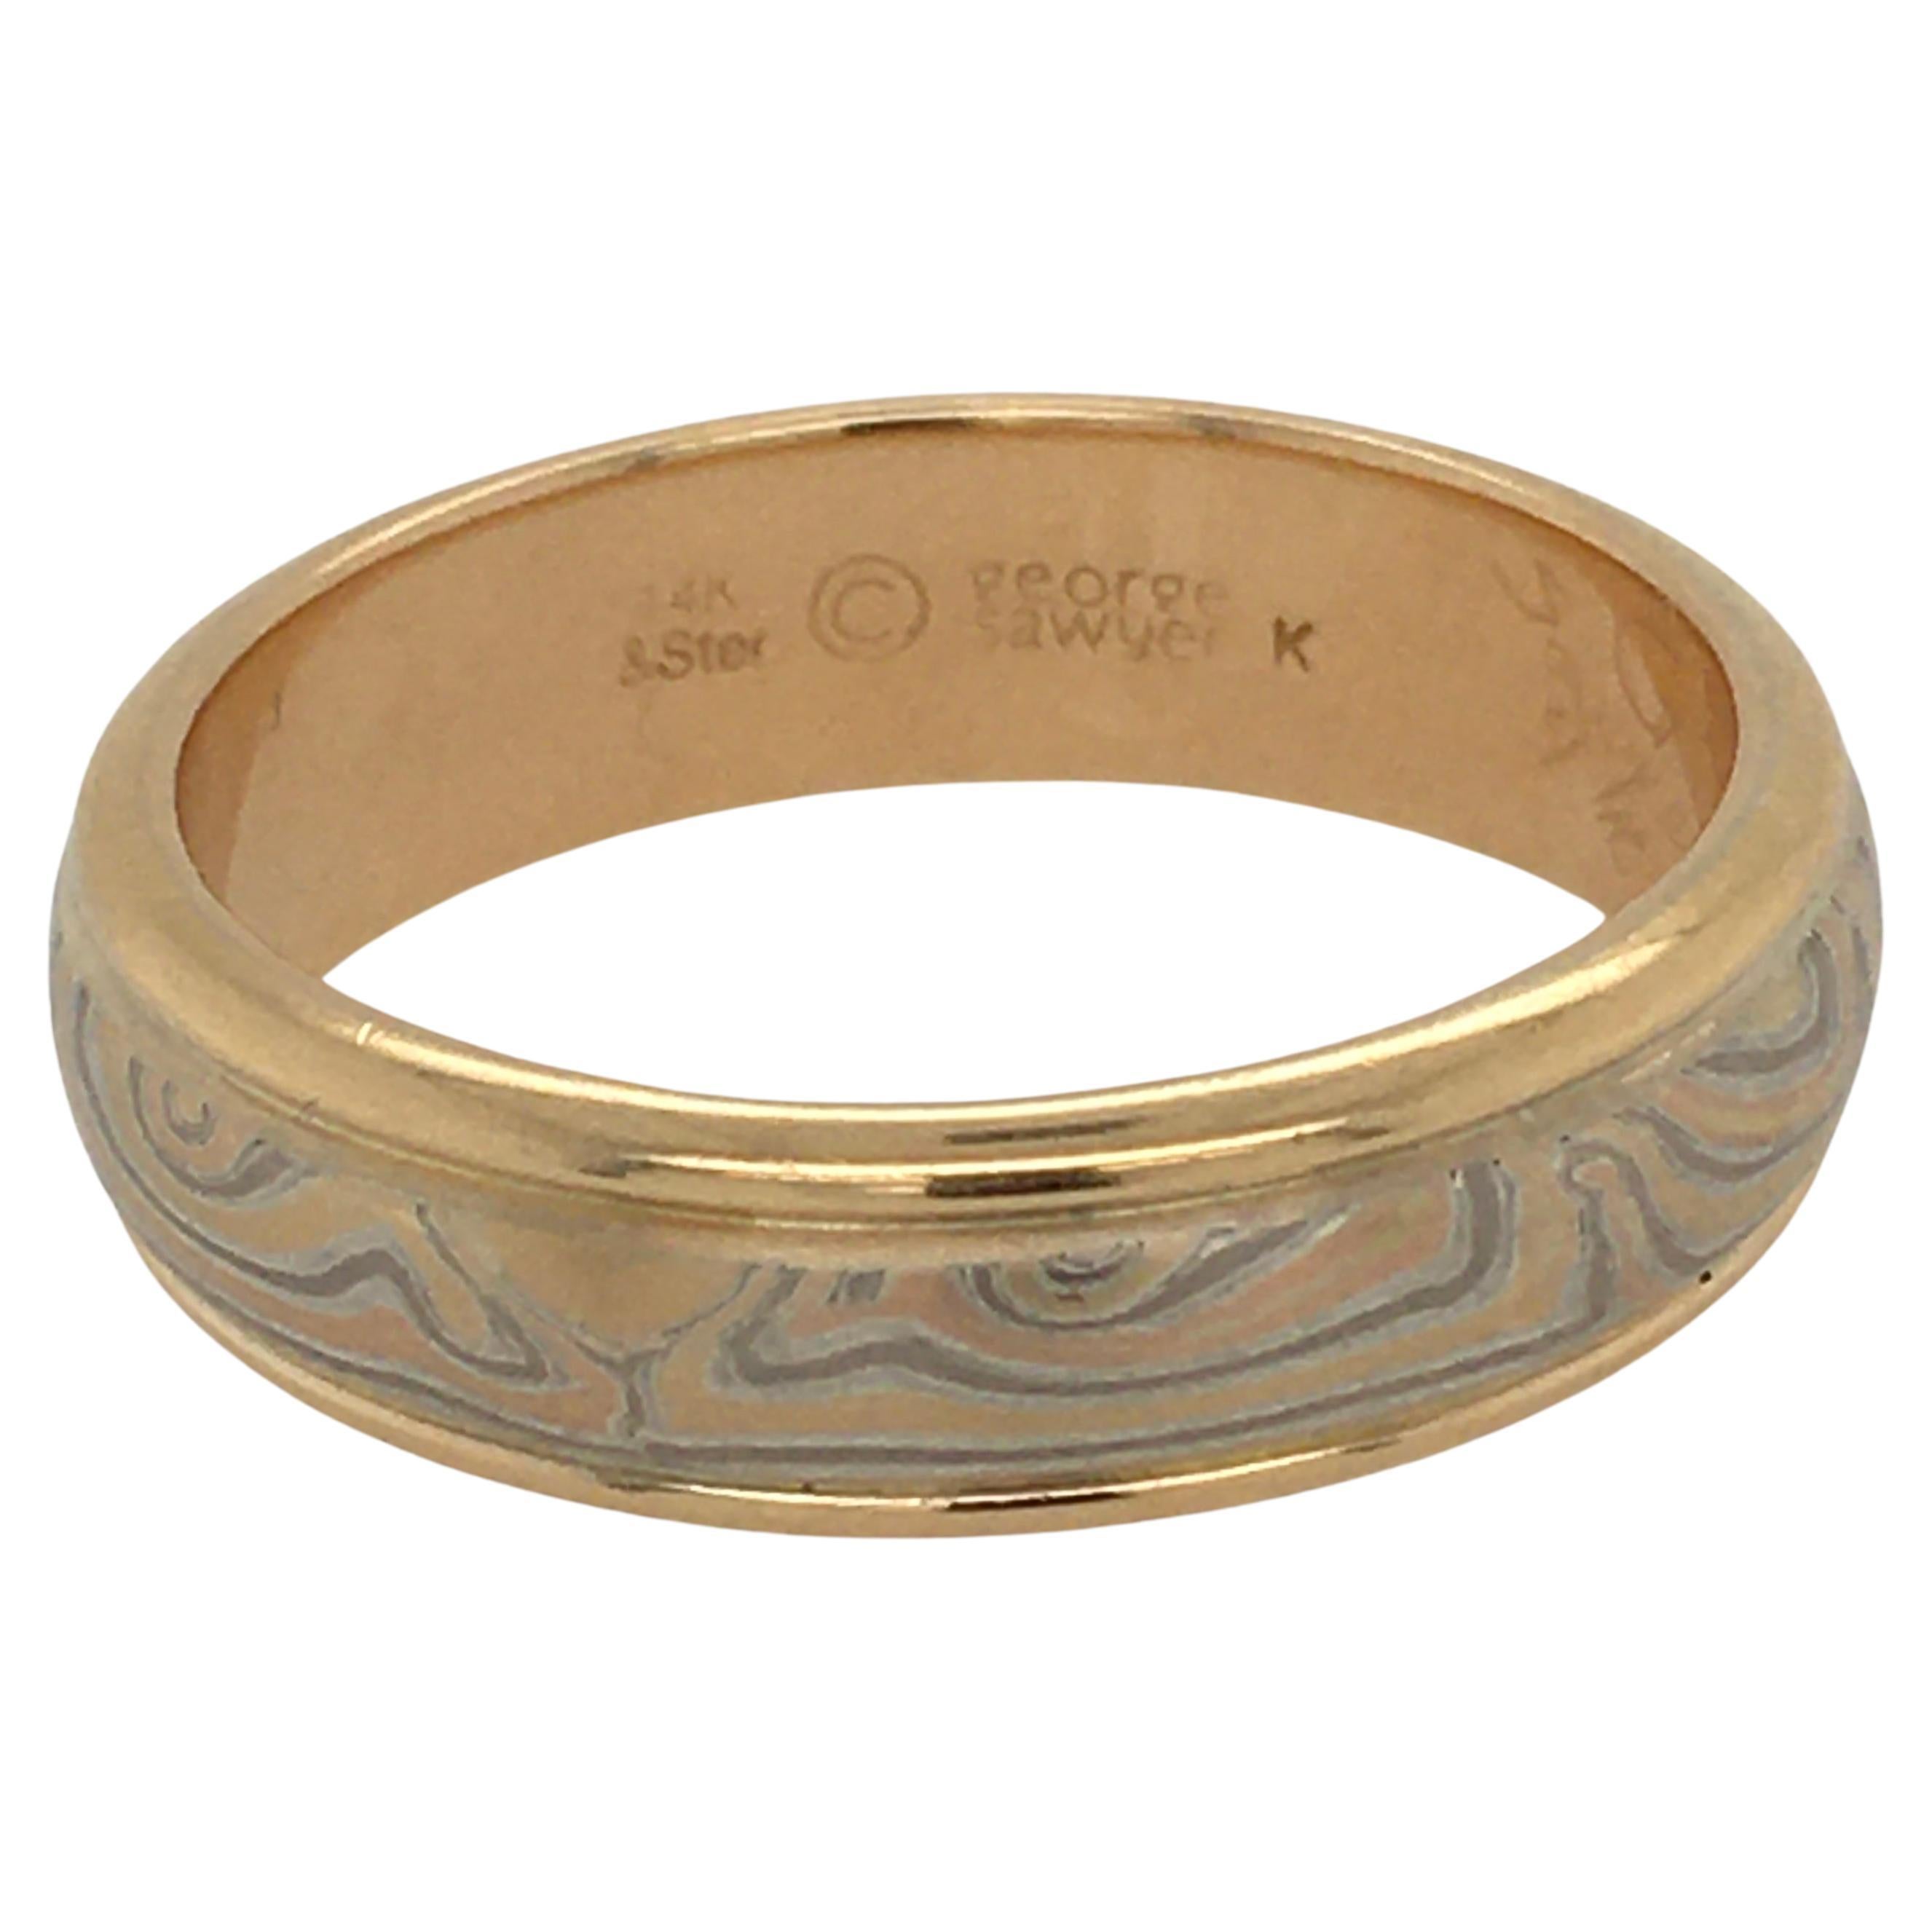 GEORGE SAWYER Mokume Round Edge w/ Gold & Etched Copper Ring